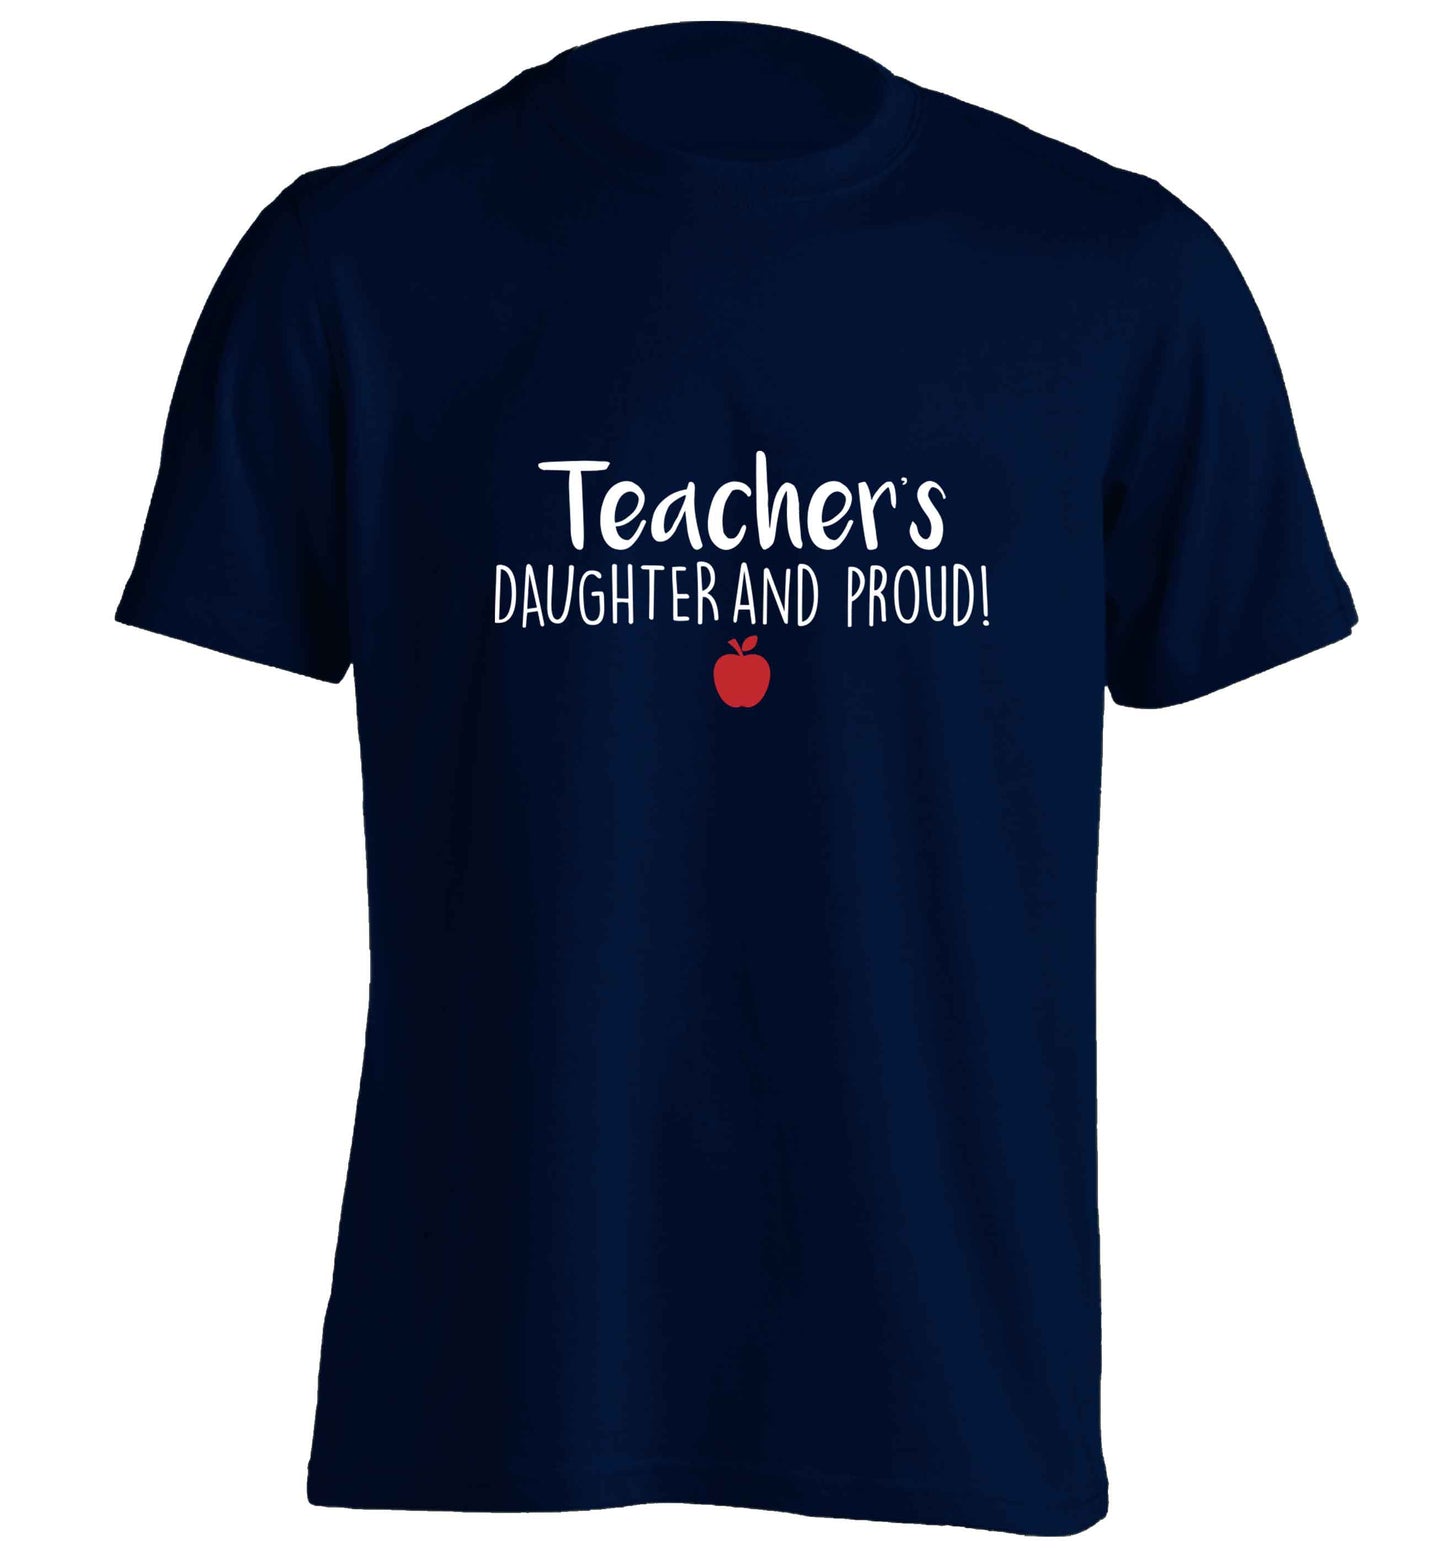 Teachers daughter and proud adults unisex navy Tshirt 2XL